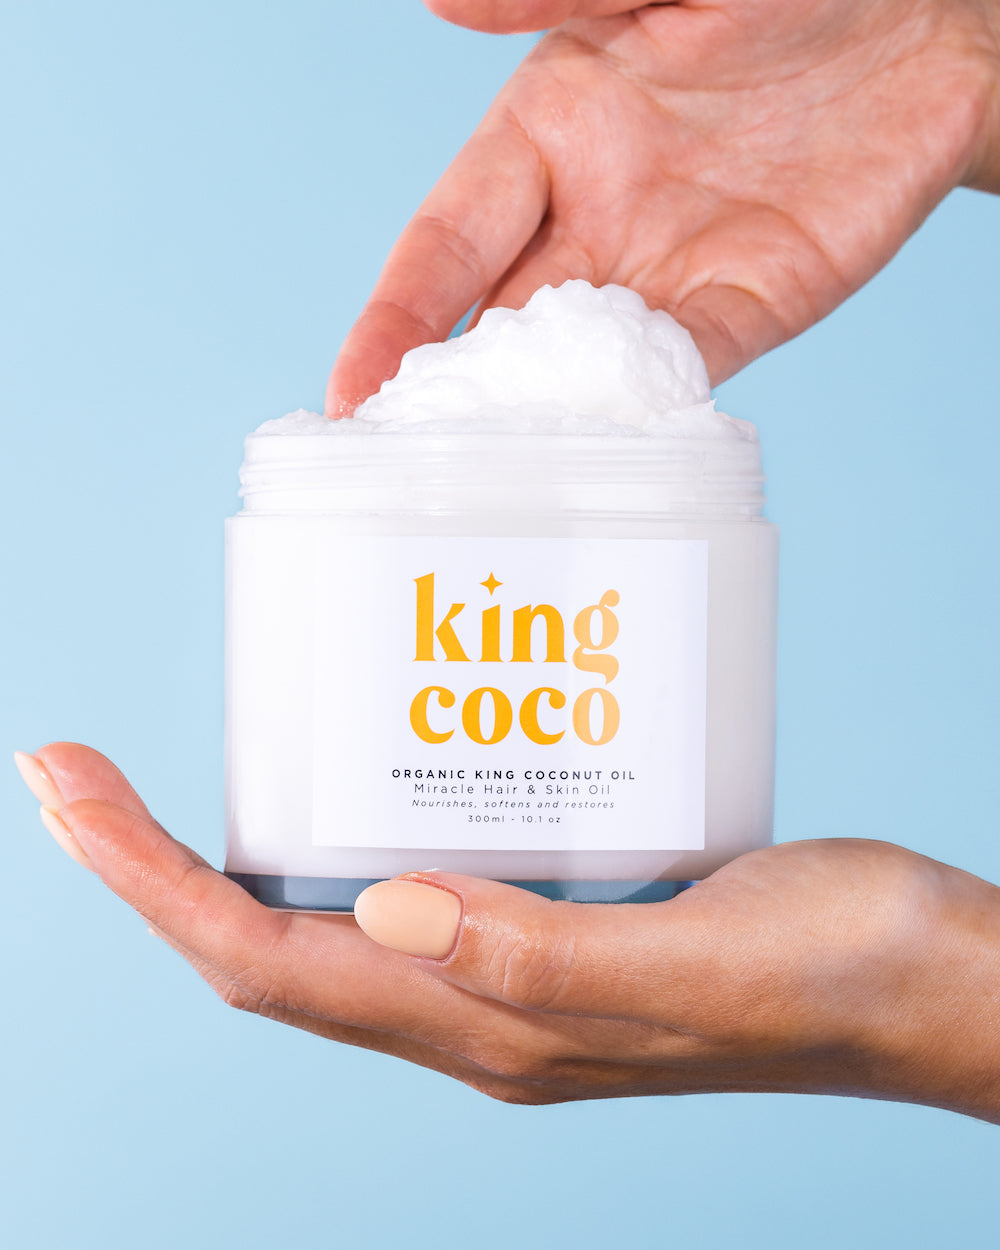 Charger la vidéo : How to use King Coco Miracle Hair &amp; Skin Oil